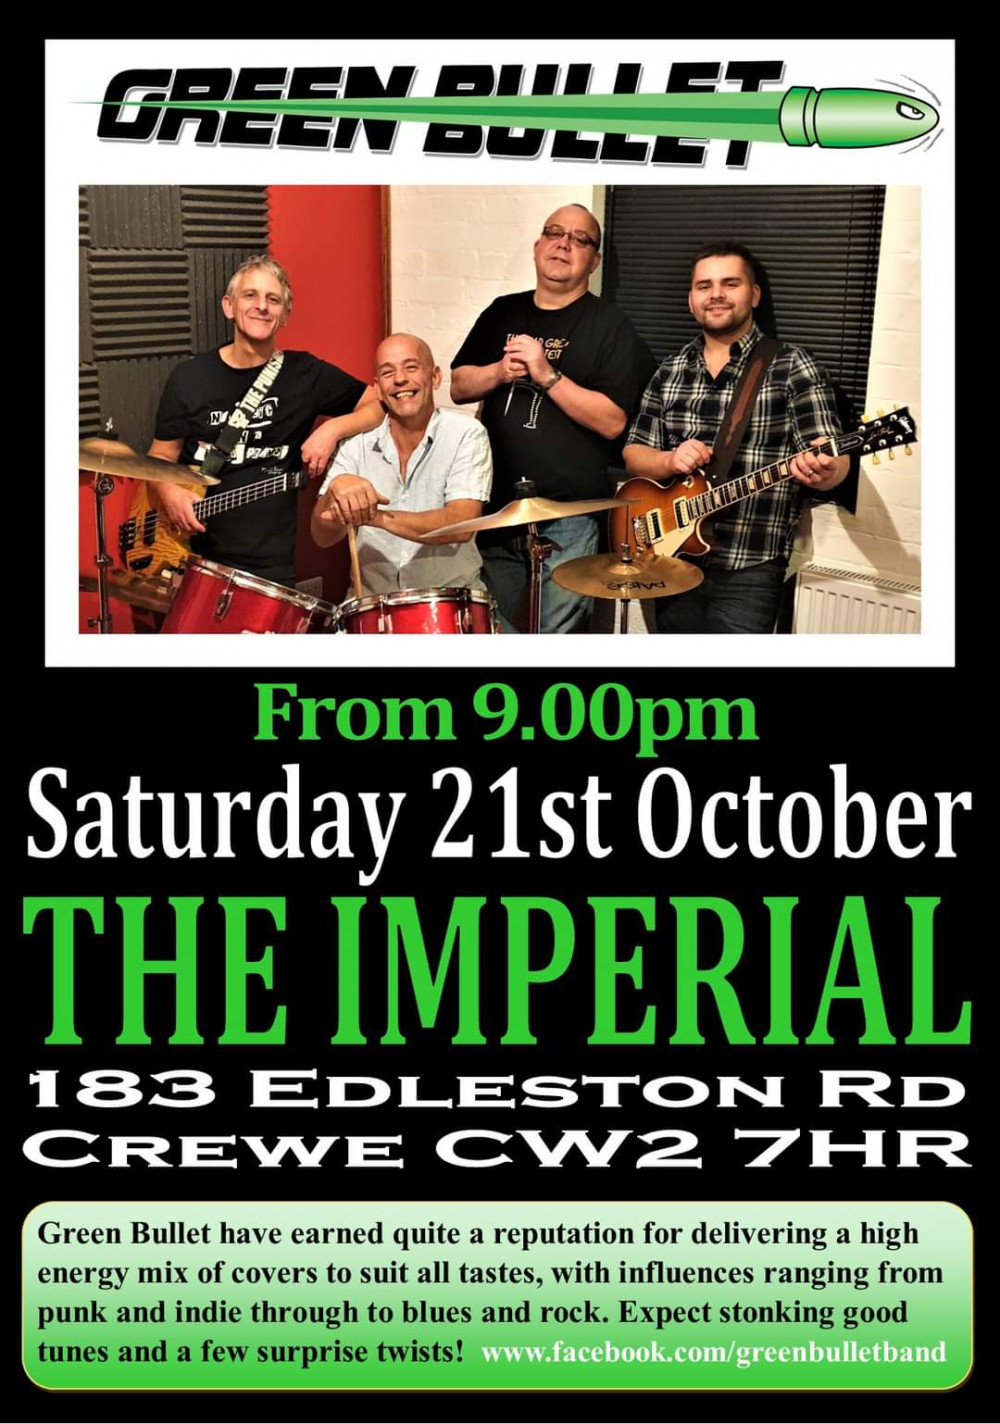 Green Bullet will be performing live at The Imperial on Saturday 21 October.